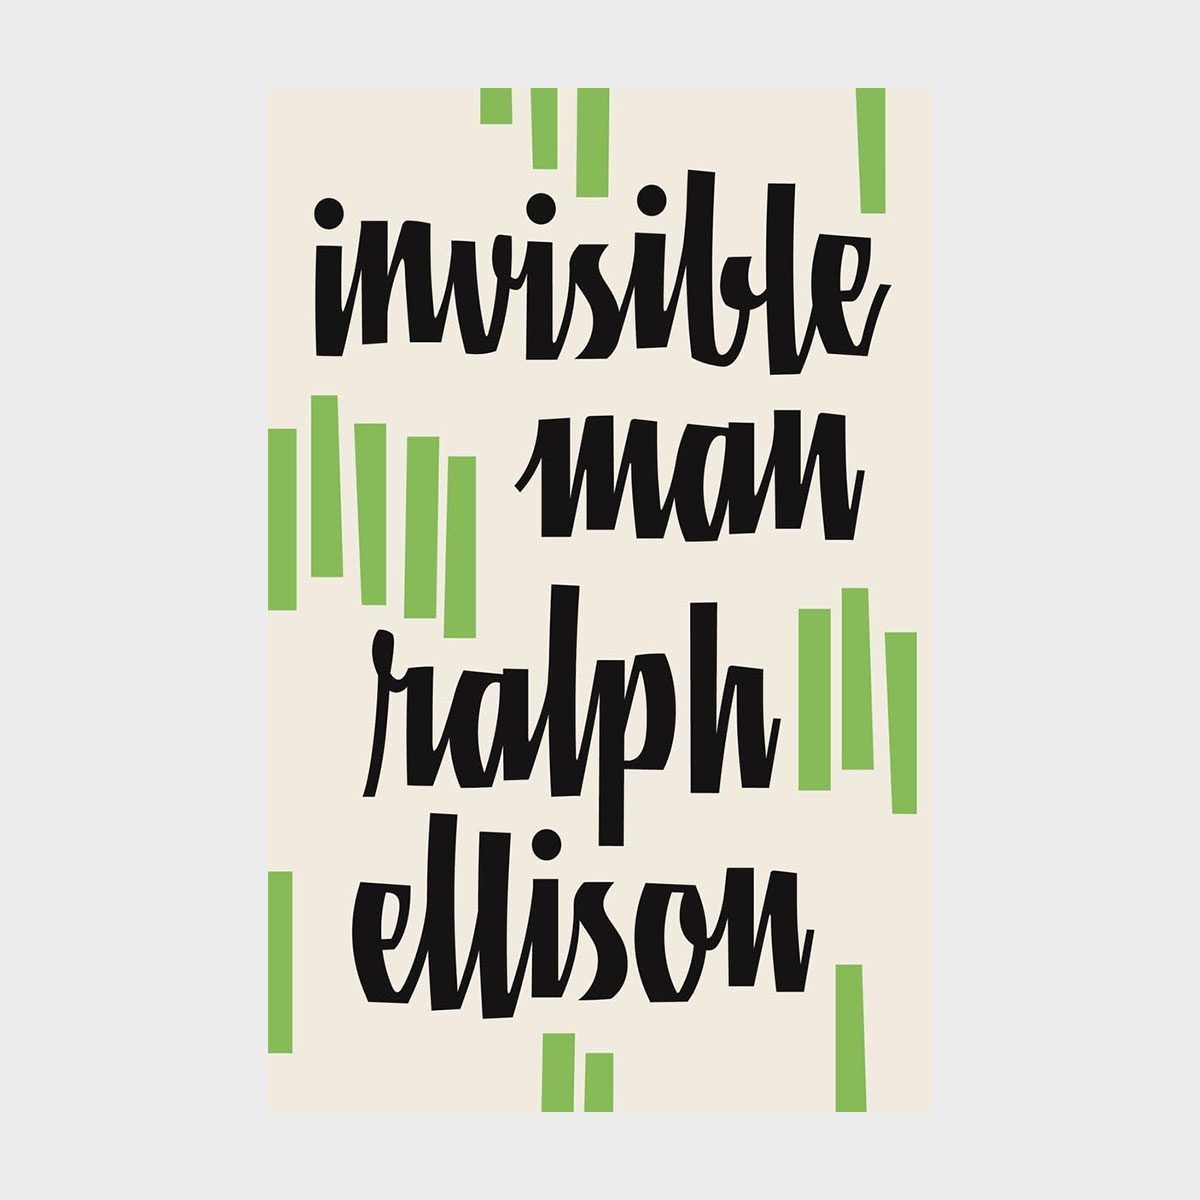 Invisible Man By Ralph Ellison